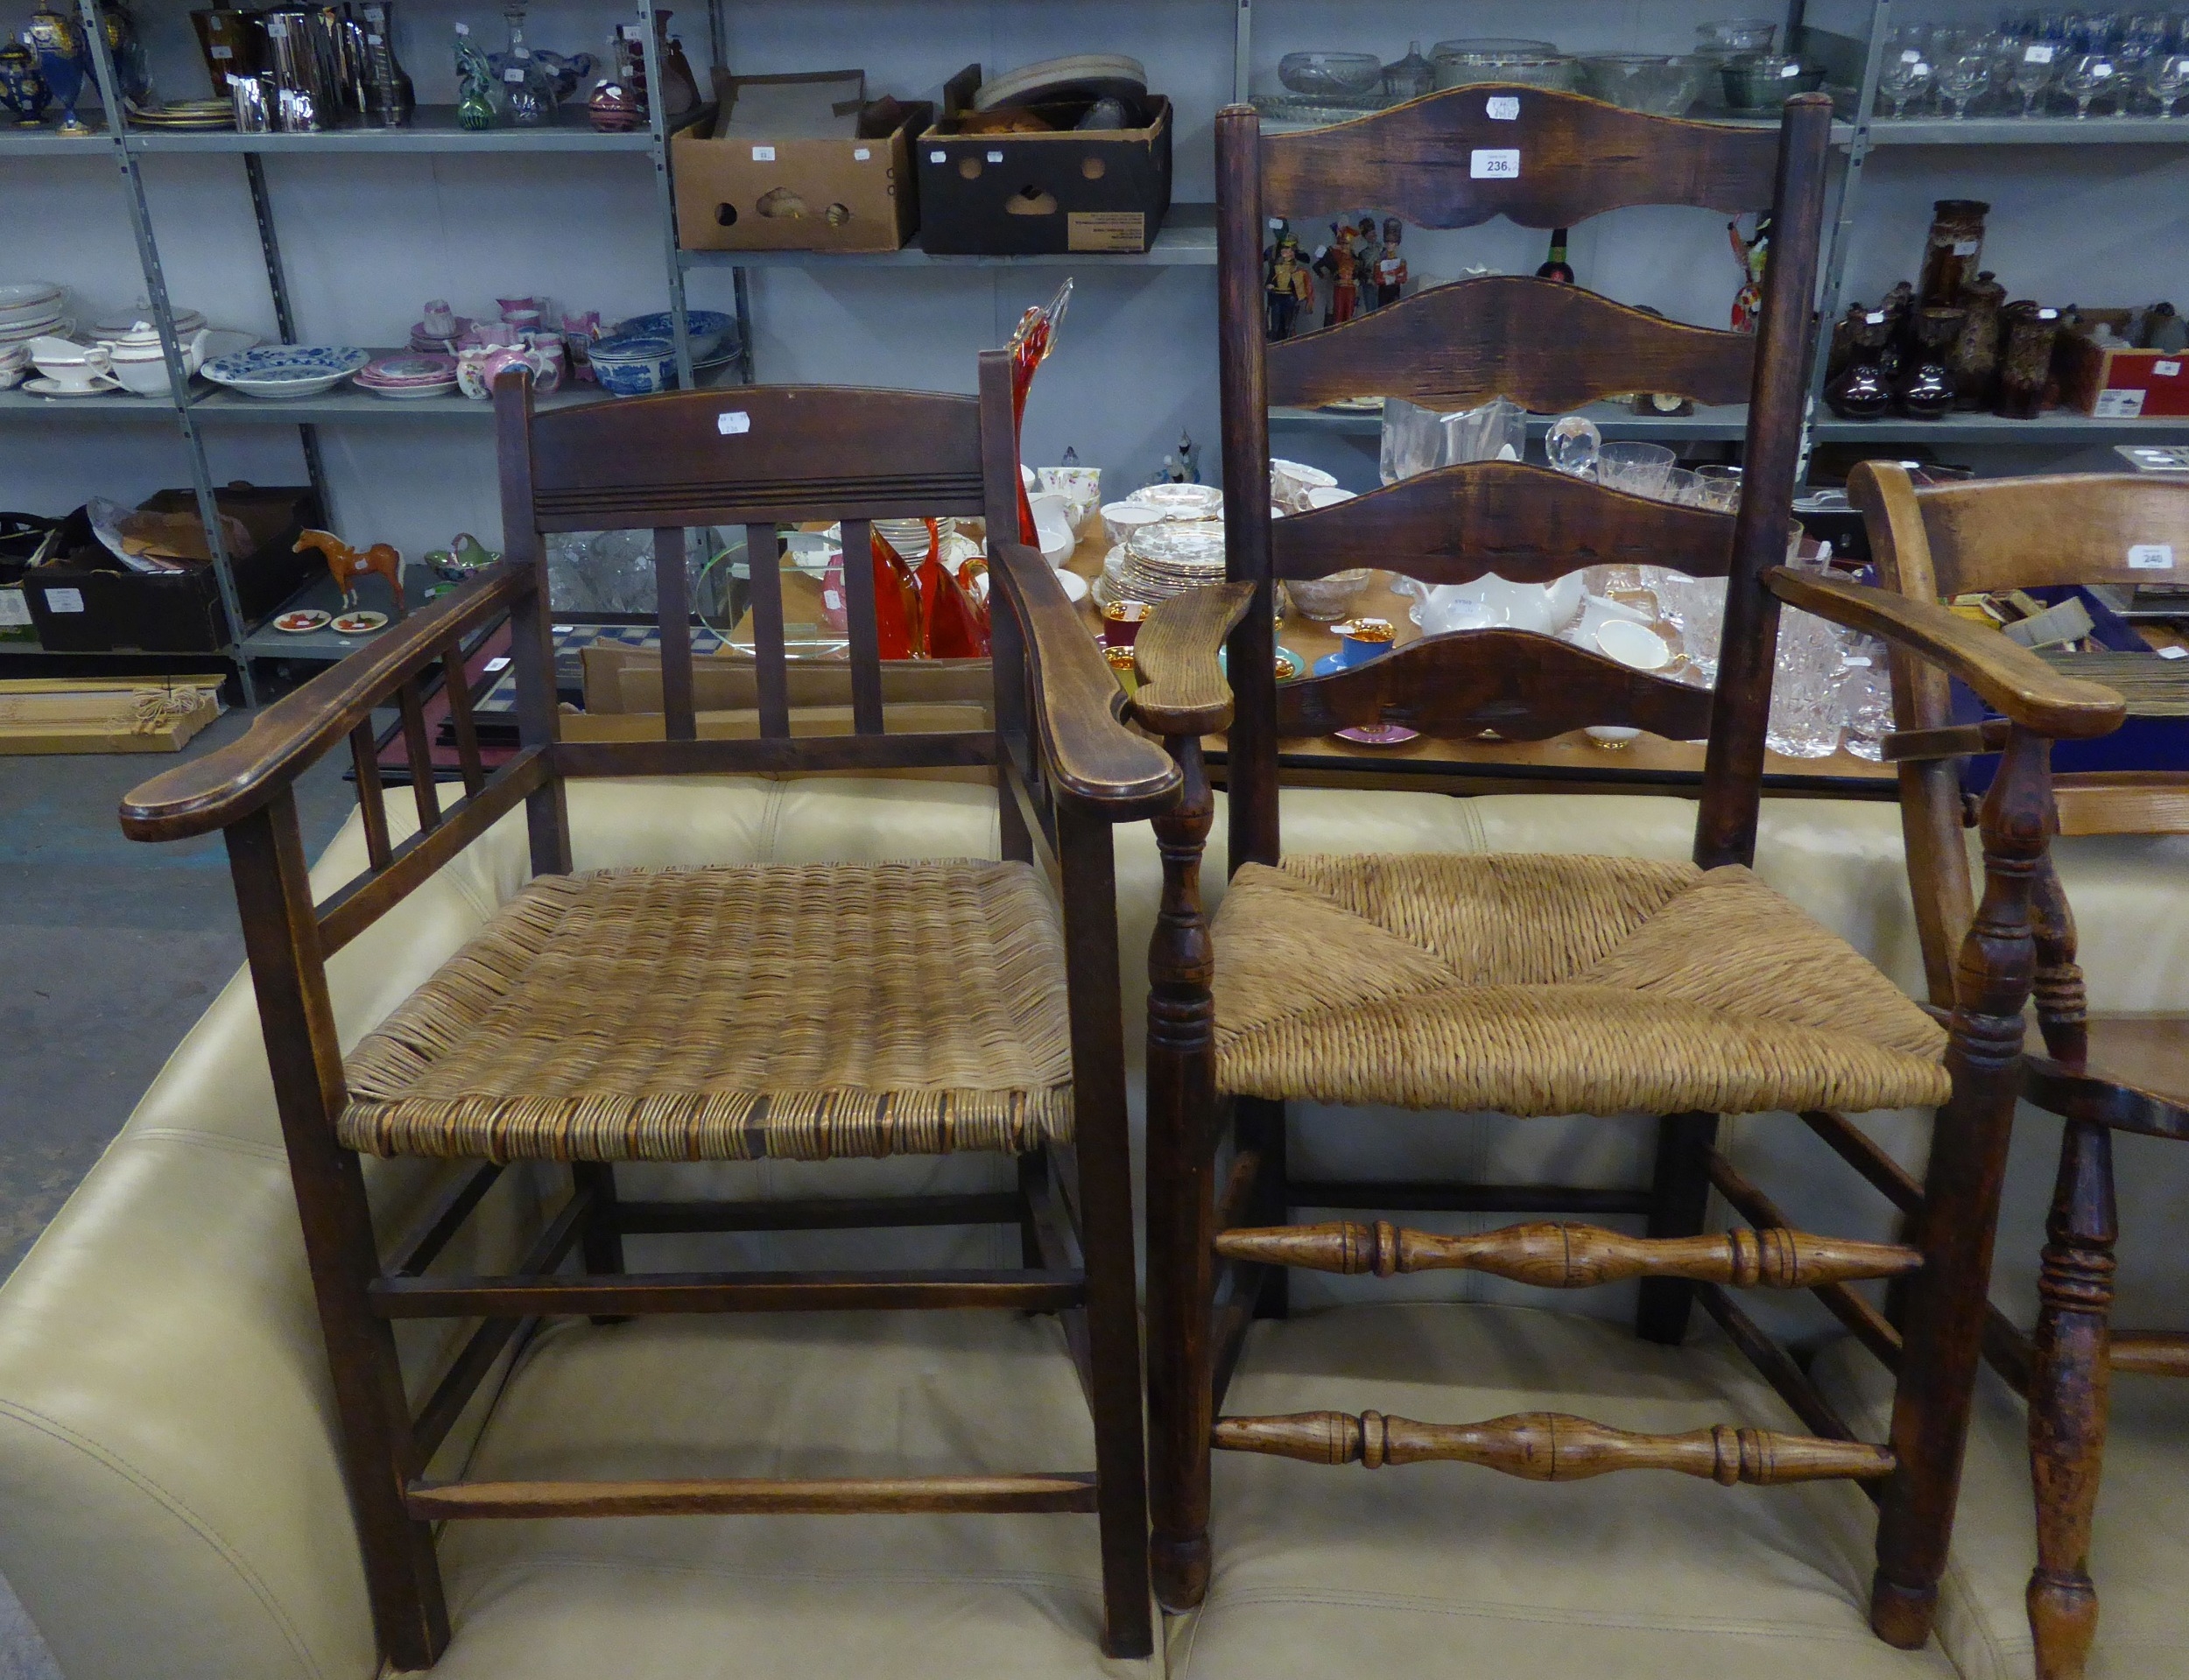 A LARGE SHAKER STYLE RUSH SEATED OPEN ARMCHAIR/CARVER PLUS AN OAK ARTS AND CRAFTS STYLE RUSH